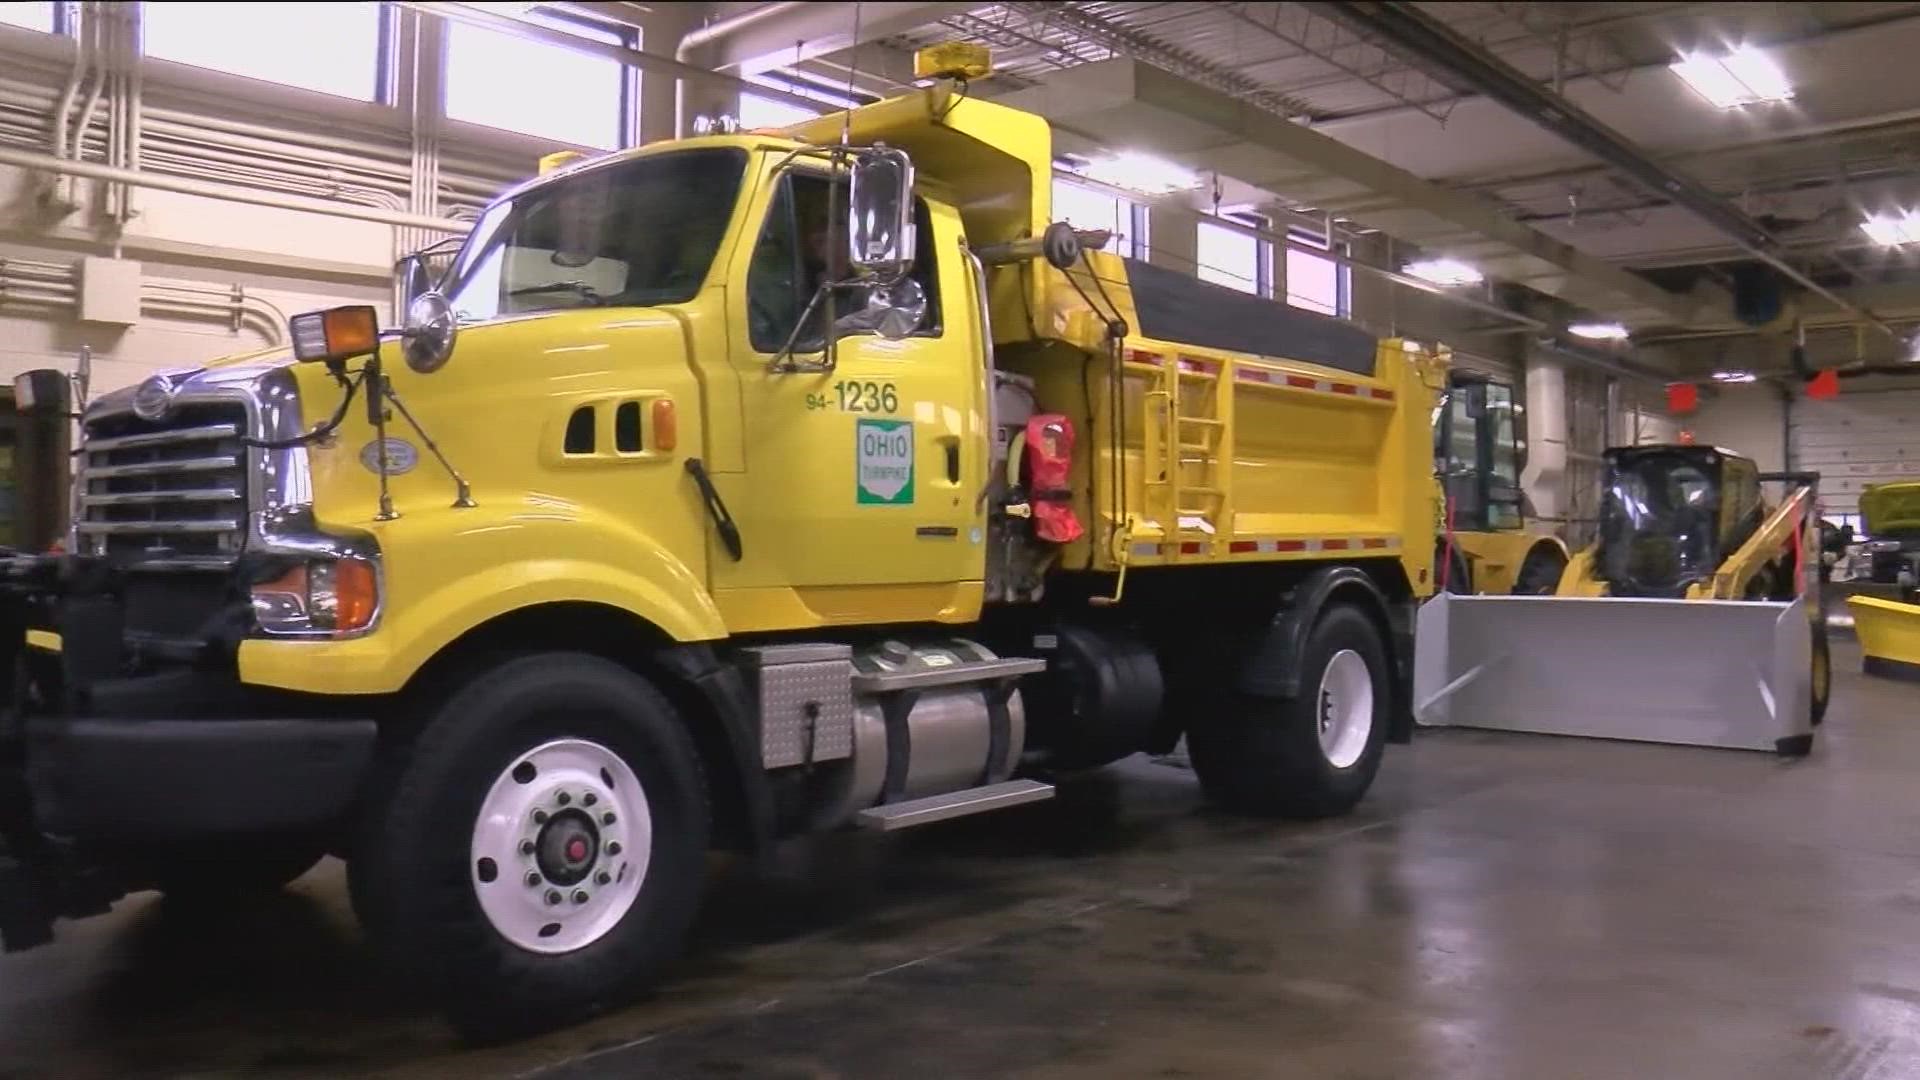 Our Madelyne Watkins got a behind the scenes look at how snowplow inspection crews are gearing up for the winter season.